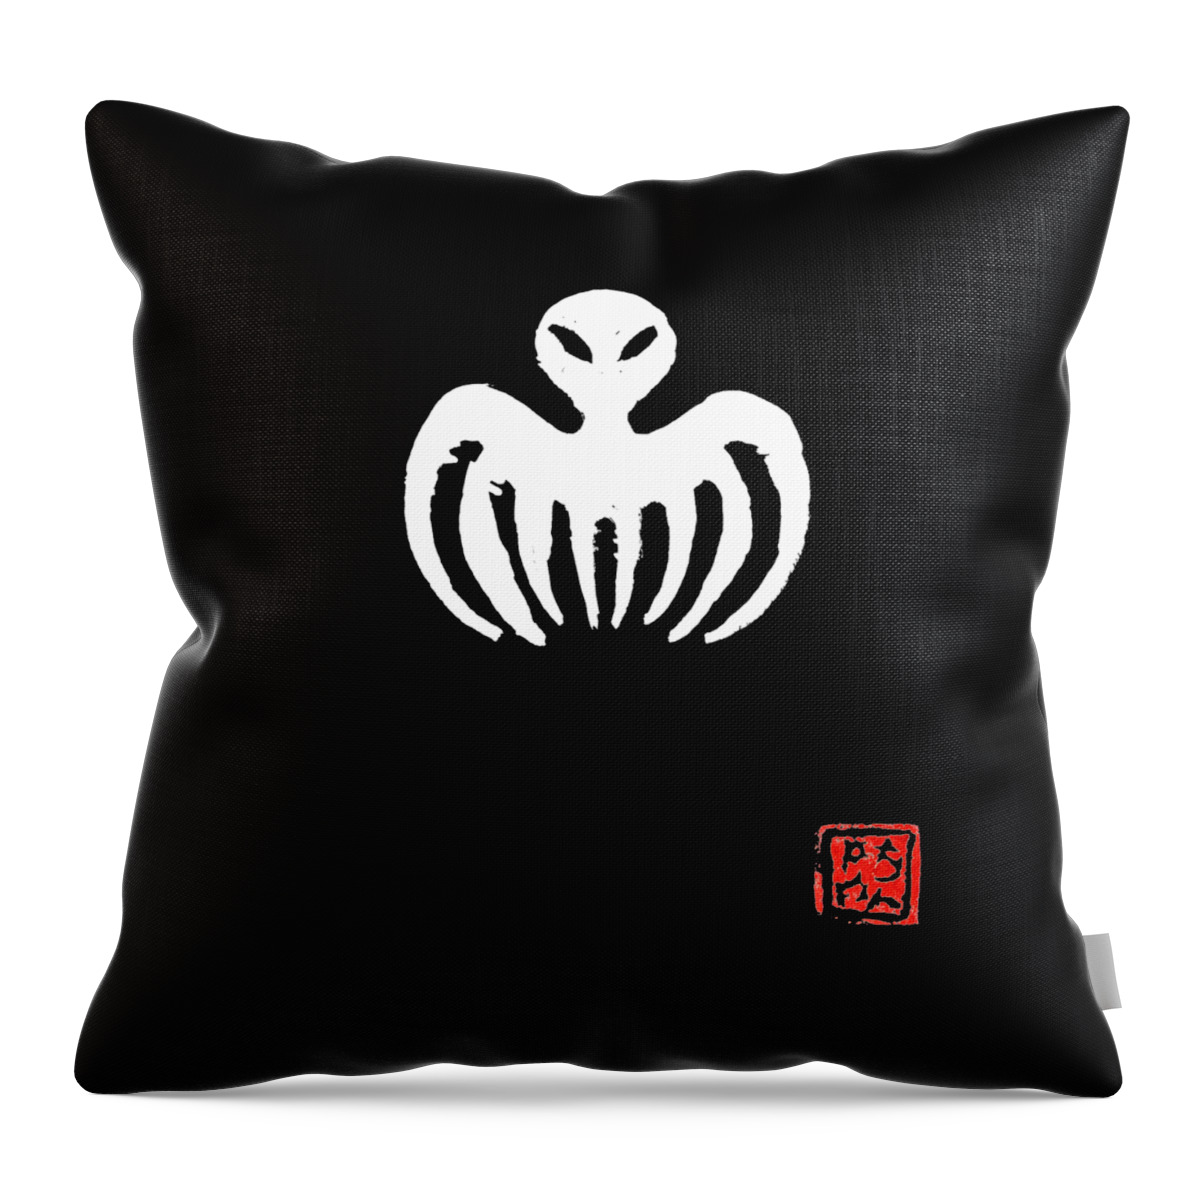 Spectre Throw Pillow featuring the drawing Spectre 1965 by Pechane Sumie